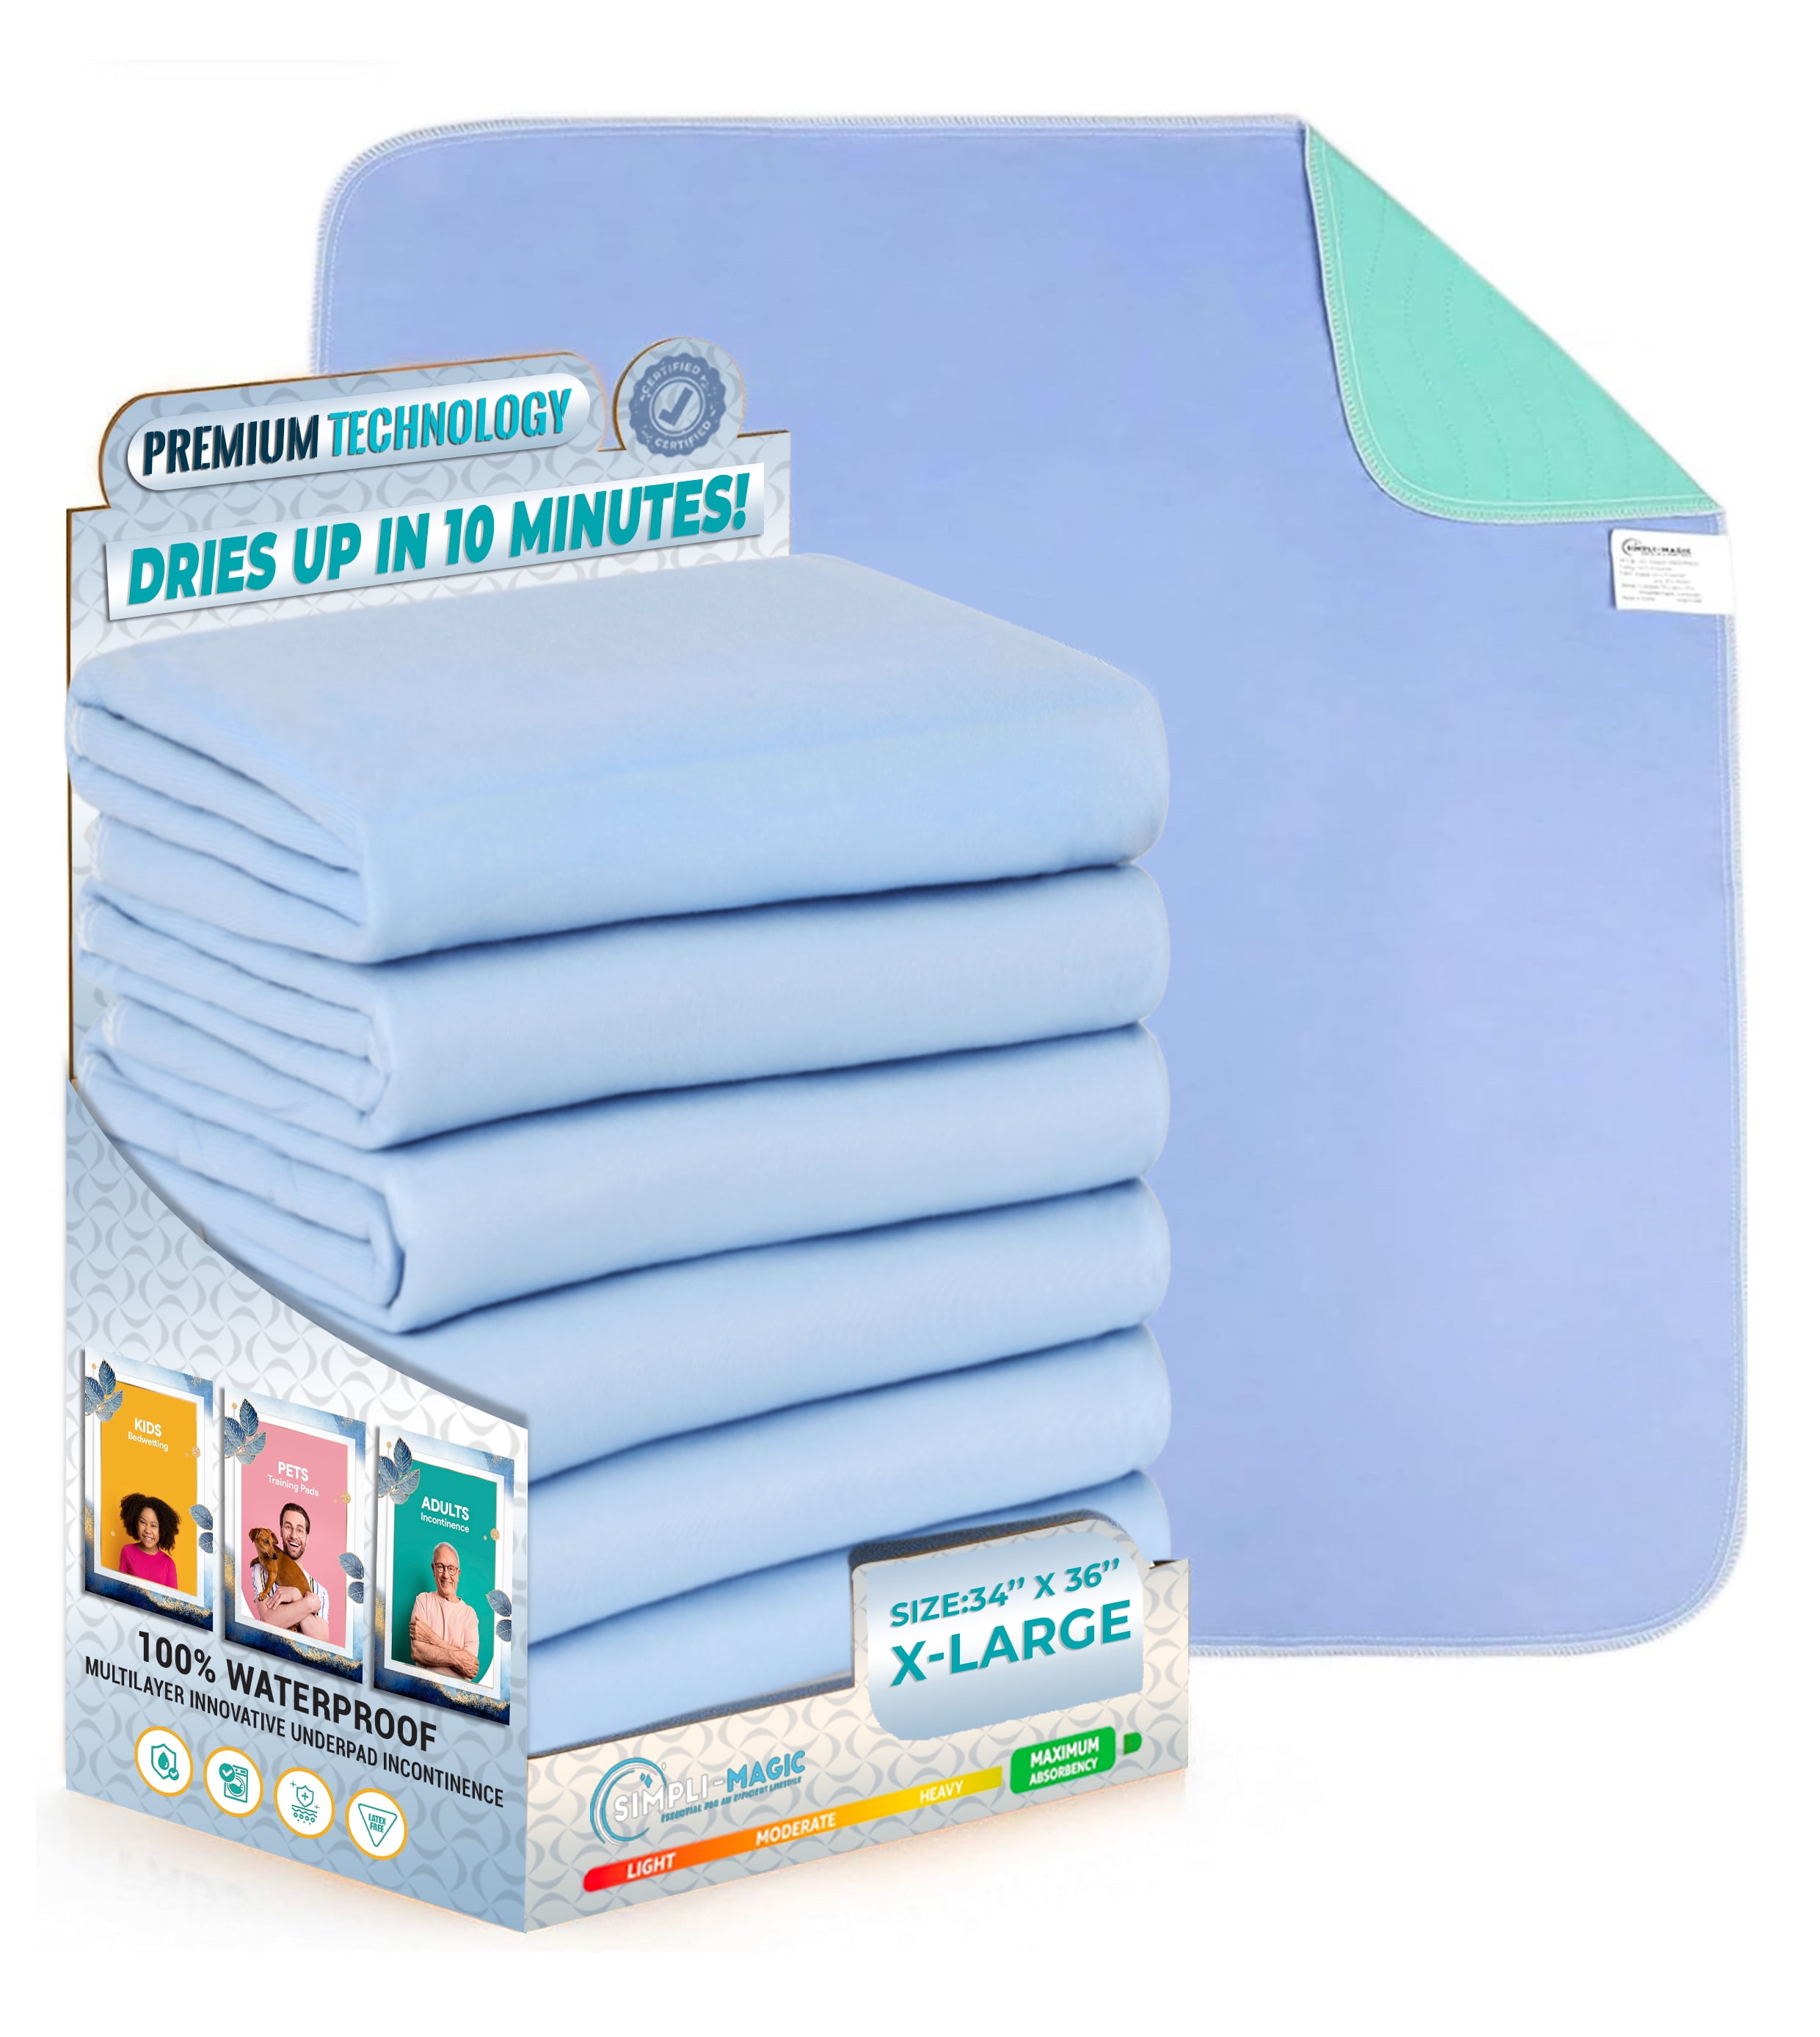 Happynites Bed Pads for Seniors, Adults and Kids - 2 Pack with Handles, 36in x 52in, Washable, Water-Resistant, and Reusable - Bedwetting & Incontine